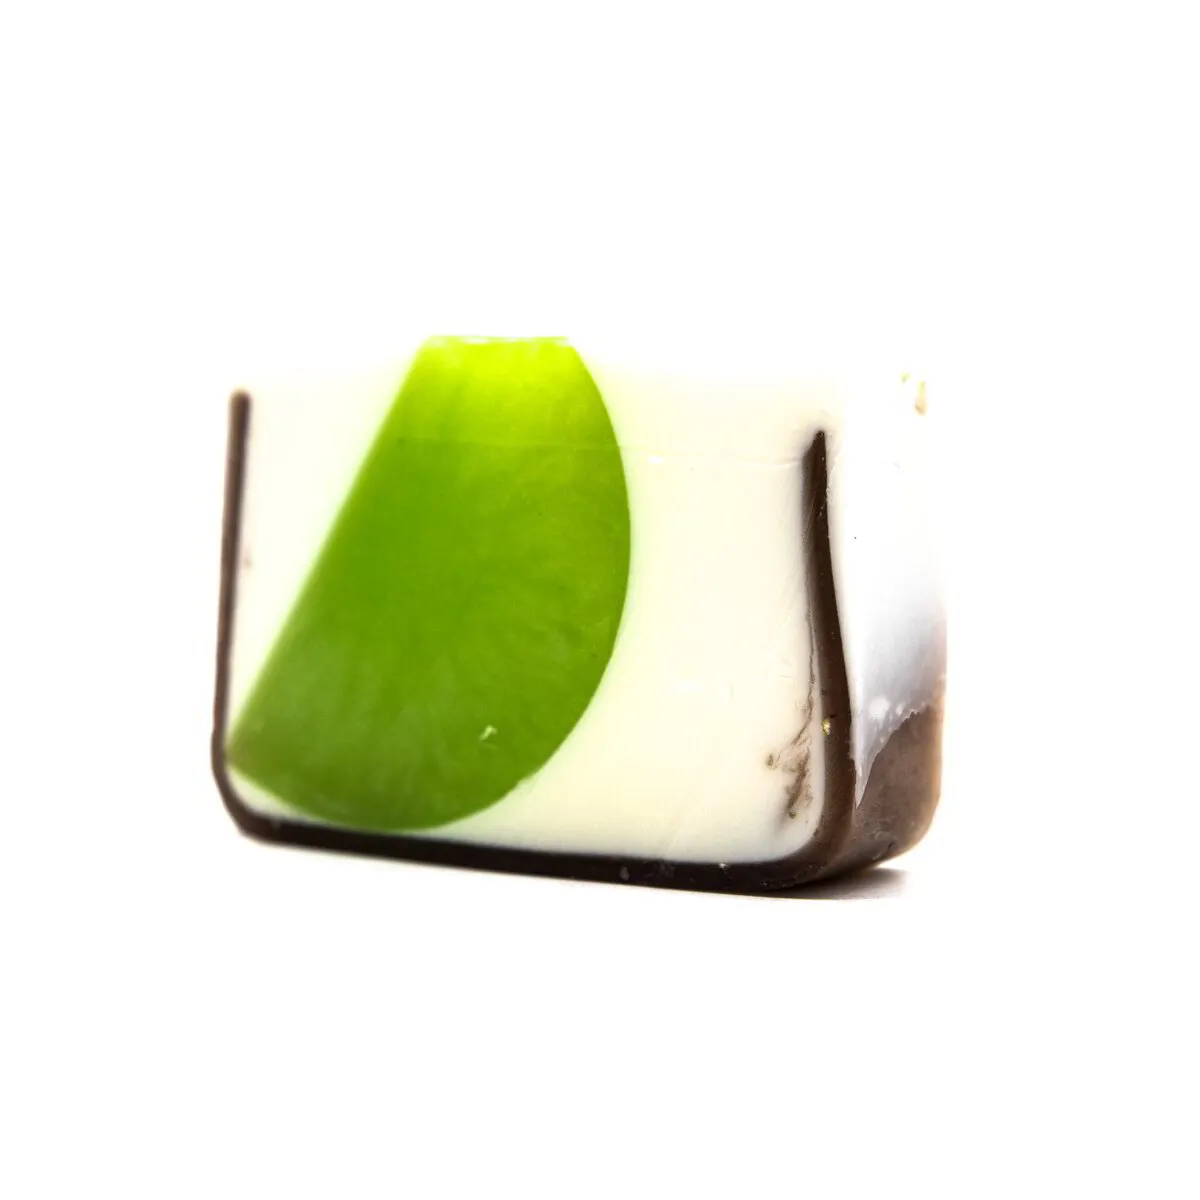 Coconut & Lime Soap